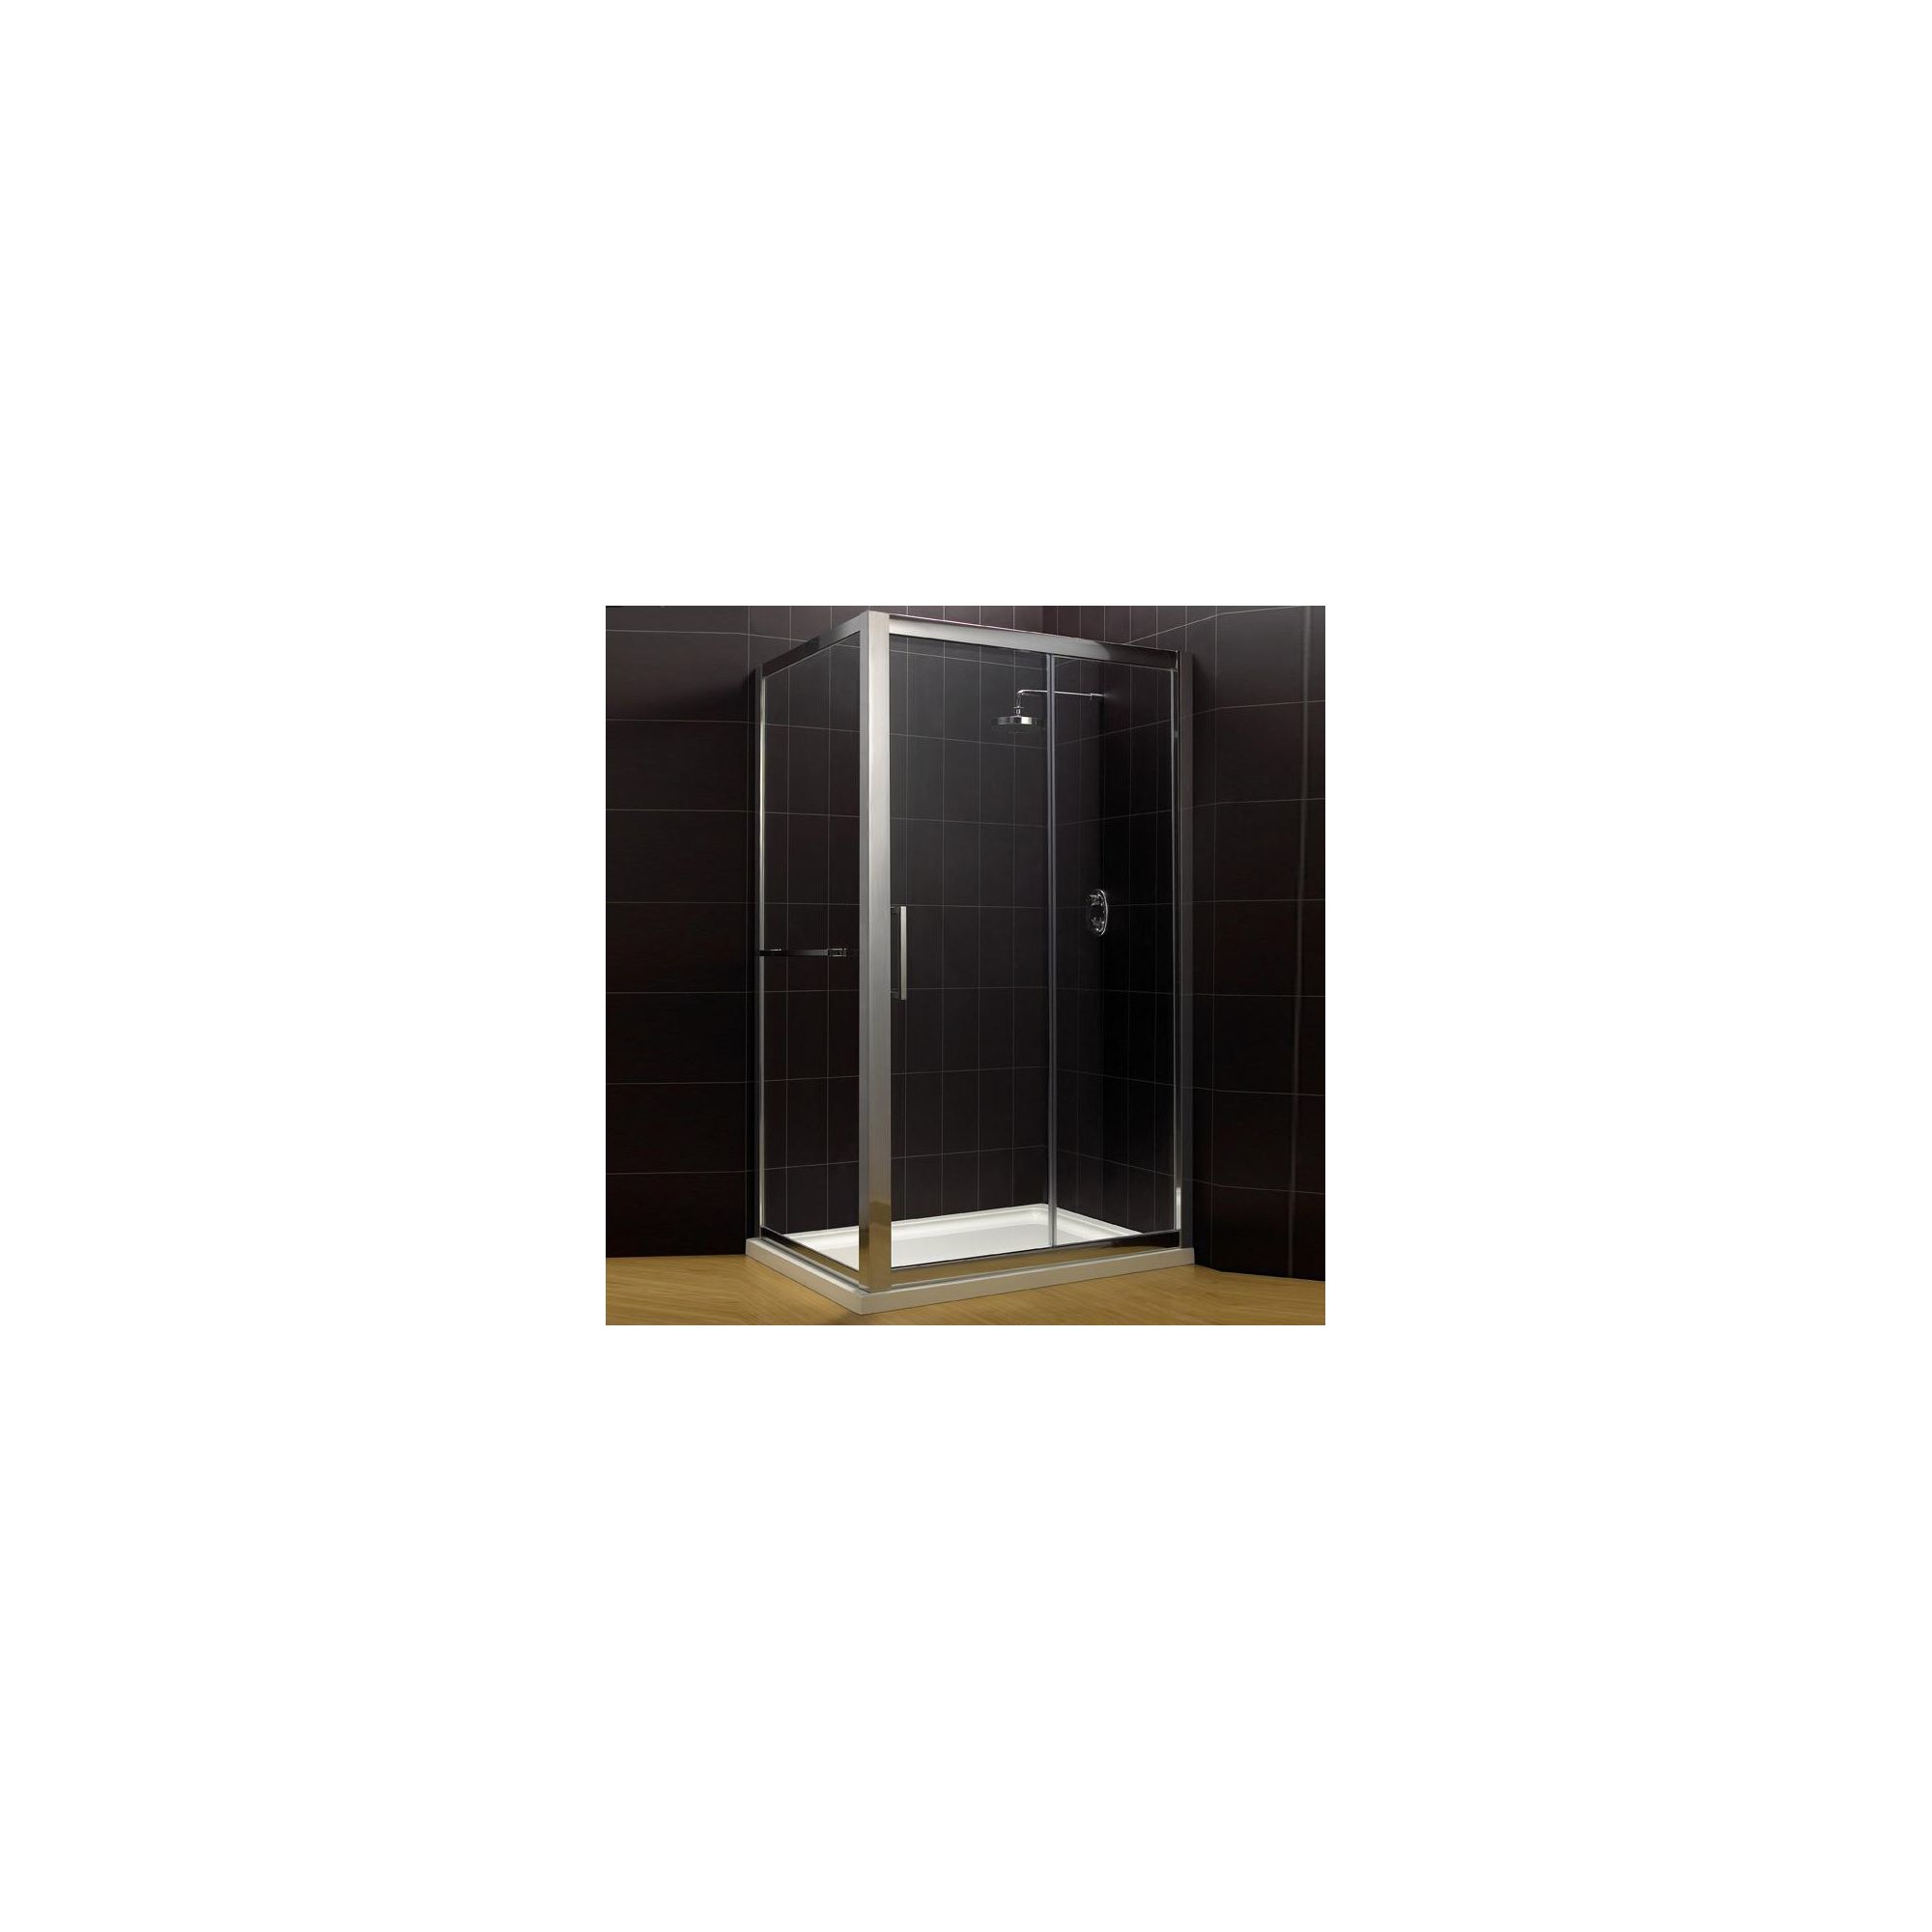 Duchy Supreme Silver Sliding Door Shower Enclosure with Towel Rail, 1600mm x 900mm, Standard Tray, 8mm Glass at Tescos Direct